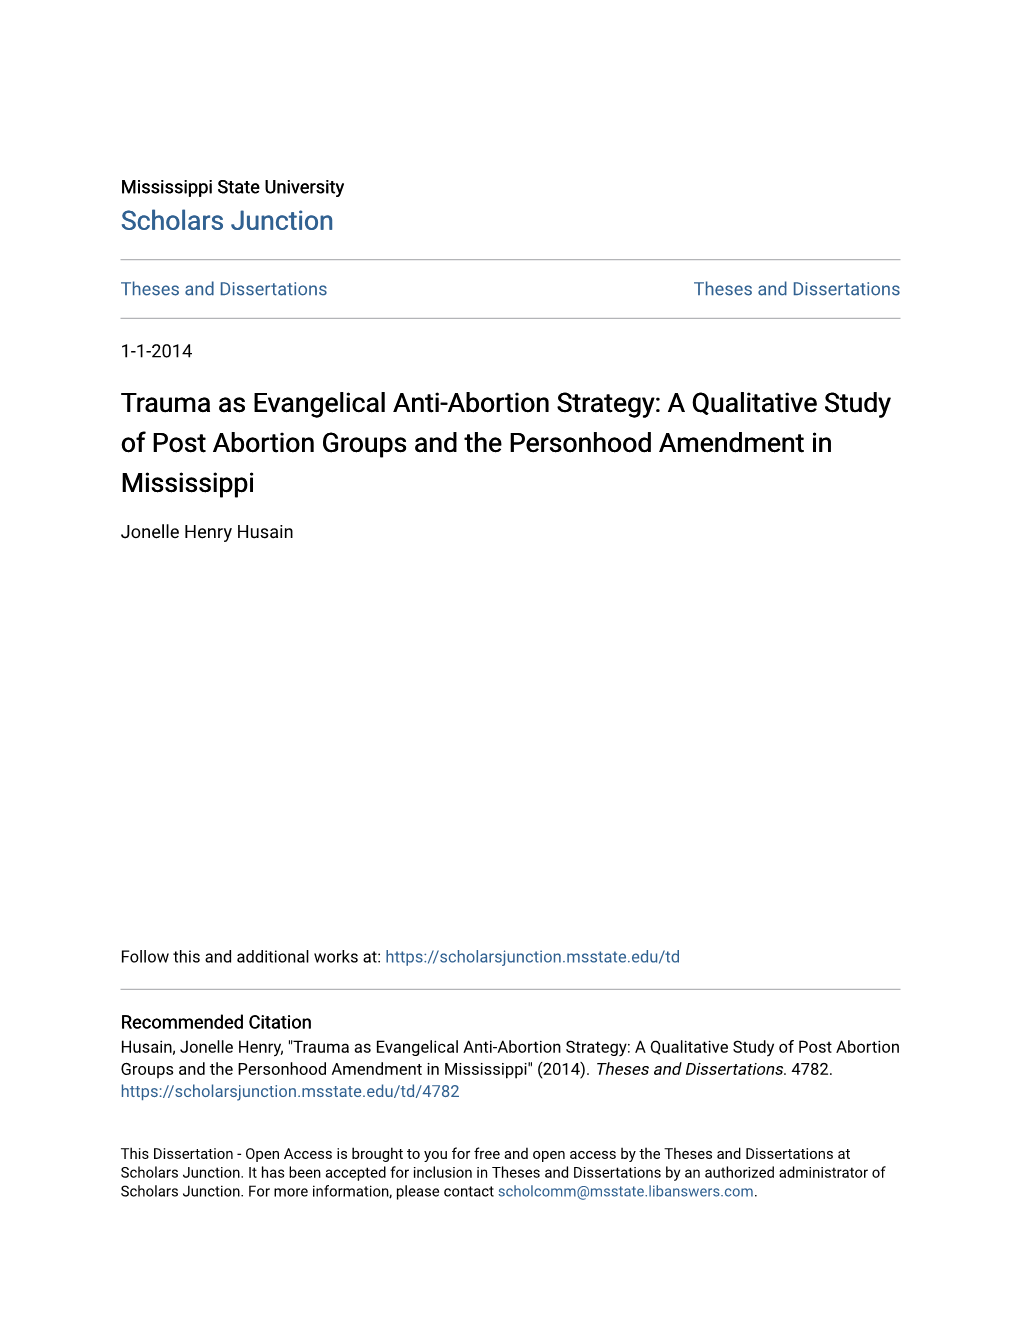 Trauma As Evangelical Anti-Abortion Strategy: a Qualitative Study of Post Abortion Groups and the Personhood Amendment in Mississippi